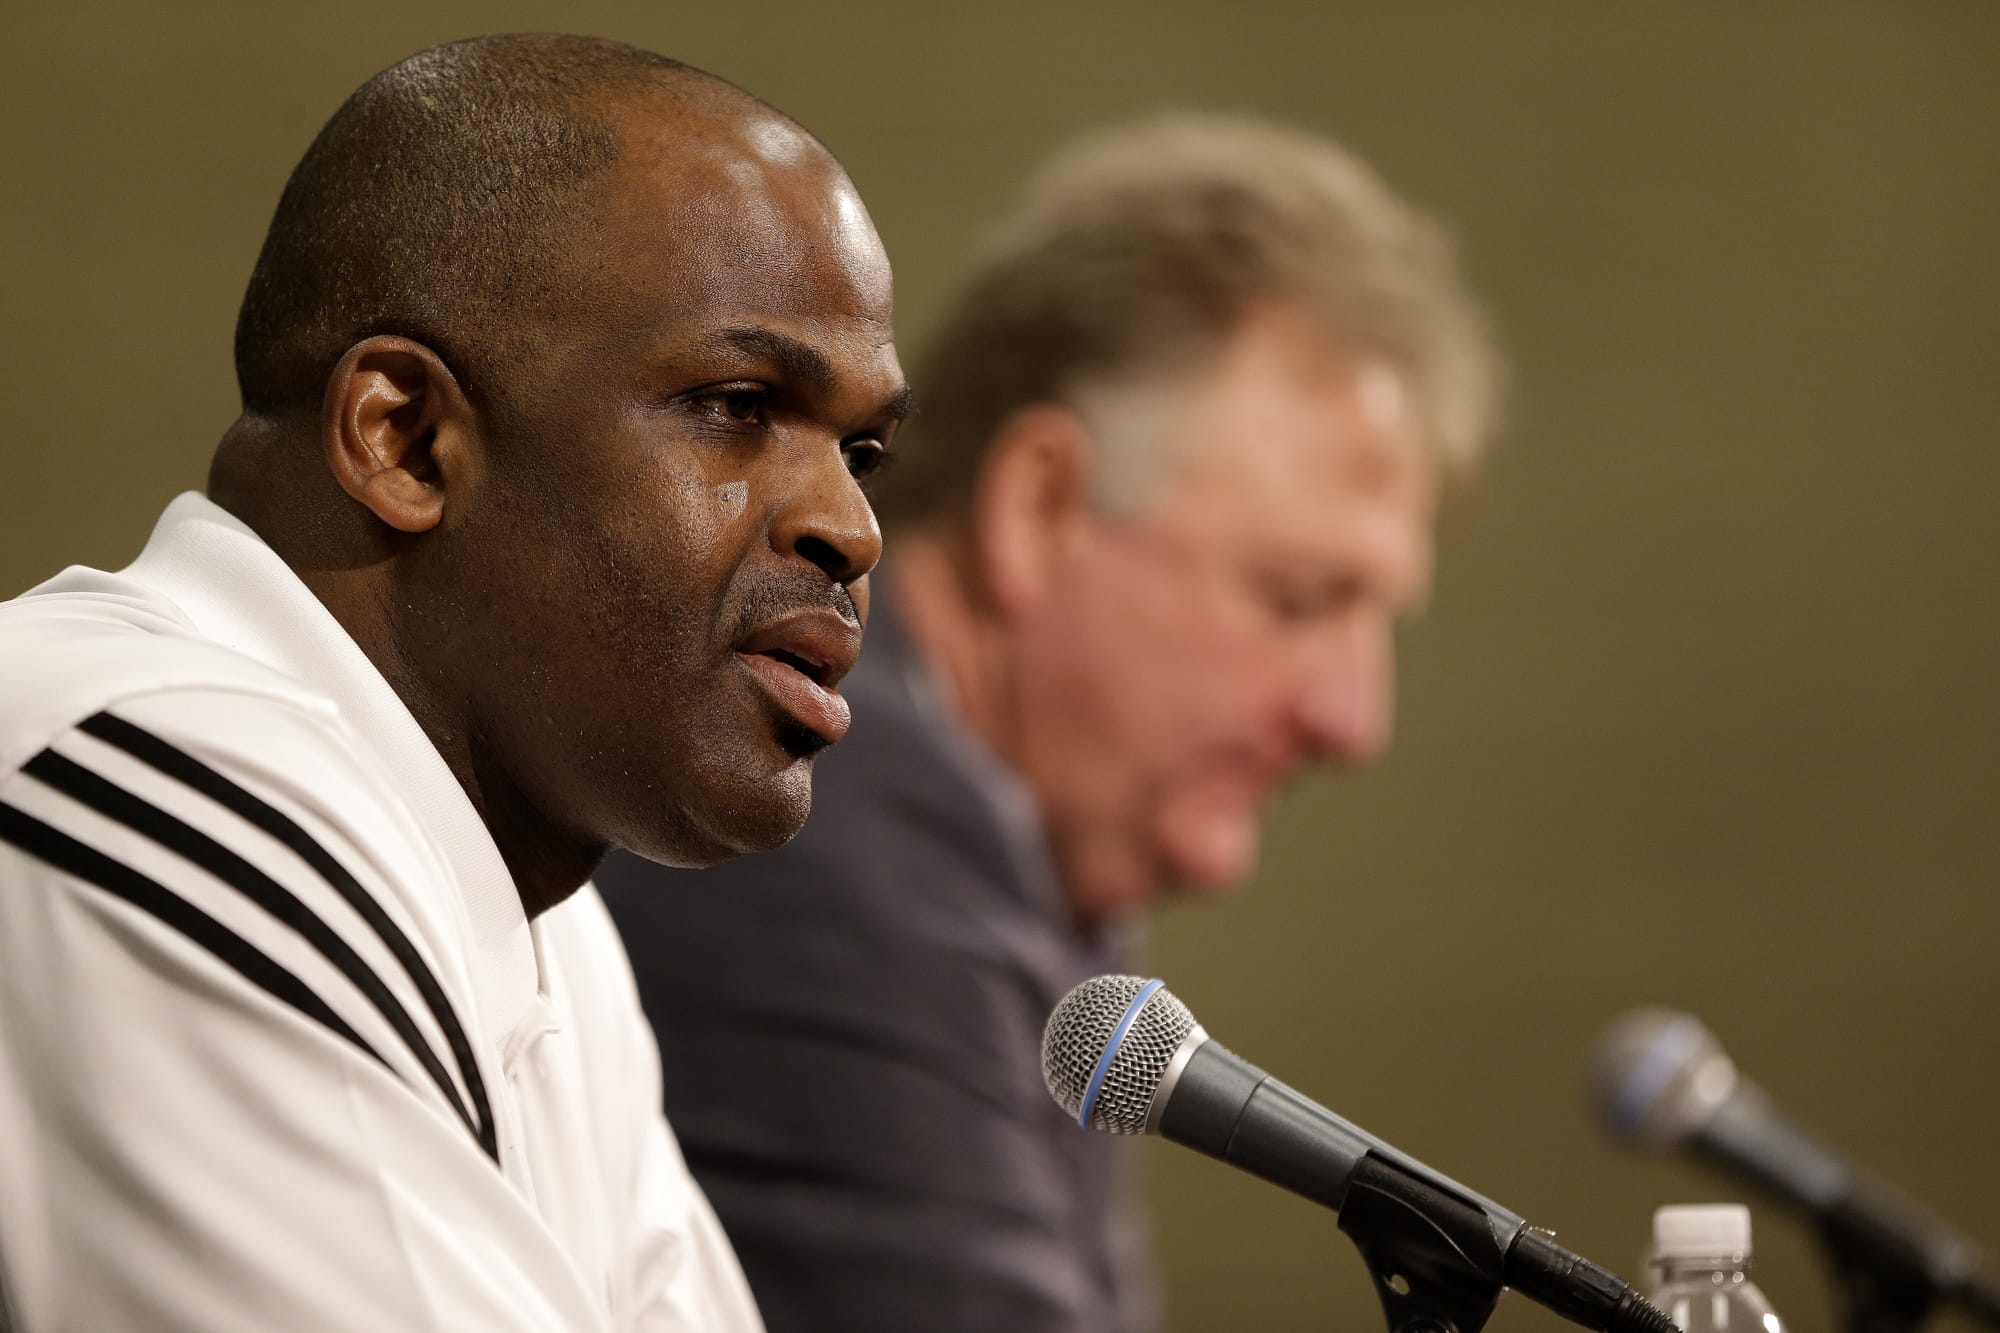 After being announced as the Indiana Pacers' new head coach by Larry Bird, president of basketball operations, Nate McMillan speaks during a news conference Monday, May 16, 2016, in Indianapolis.